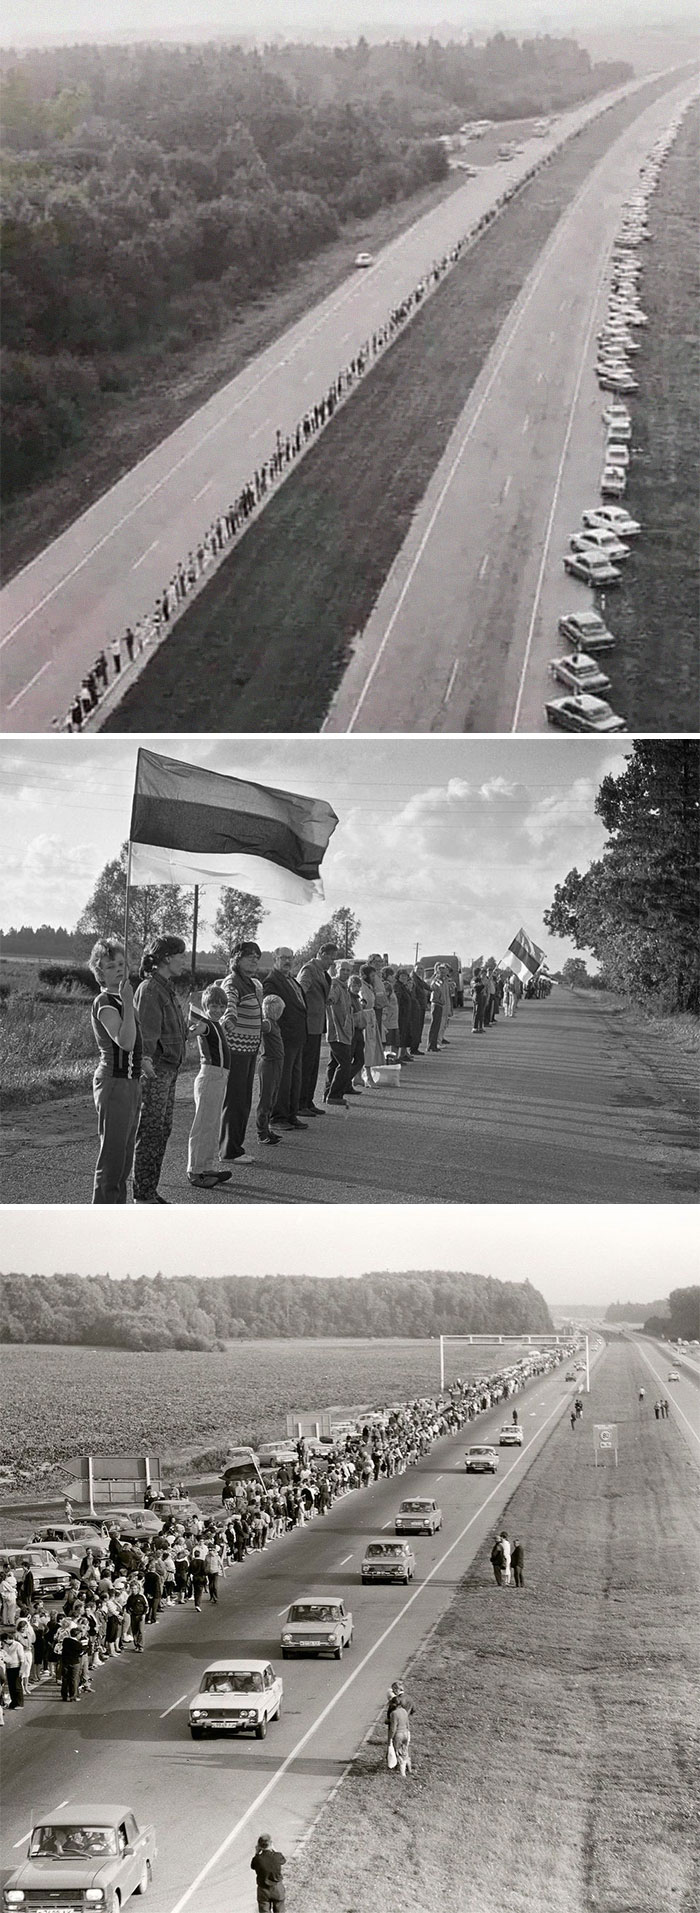 On August 23, 1989, About 2 Million People From Latvia, Estonia And Lithuania Formed A Human Chain That United All 3 Countries To Show The World Their Desire To Escape The Soviet Union And The Communism That Brought Only Suffering And Poverty. This Power Stretched 600 Km